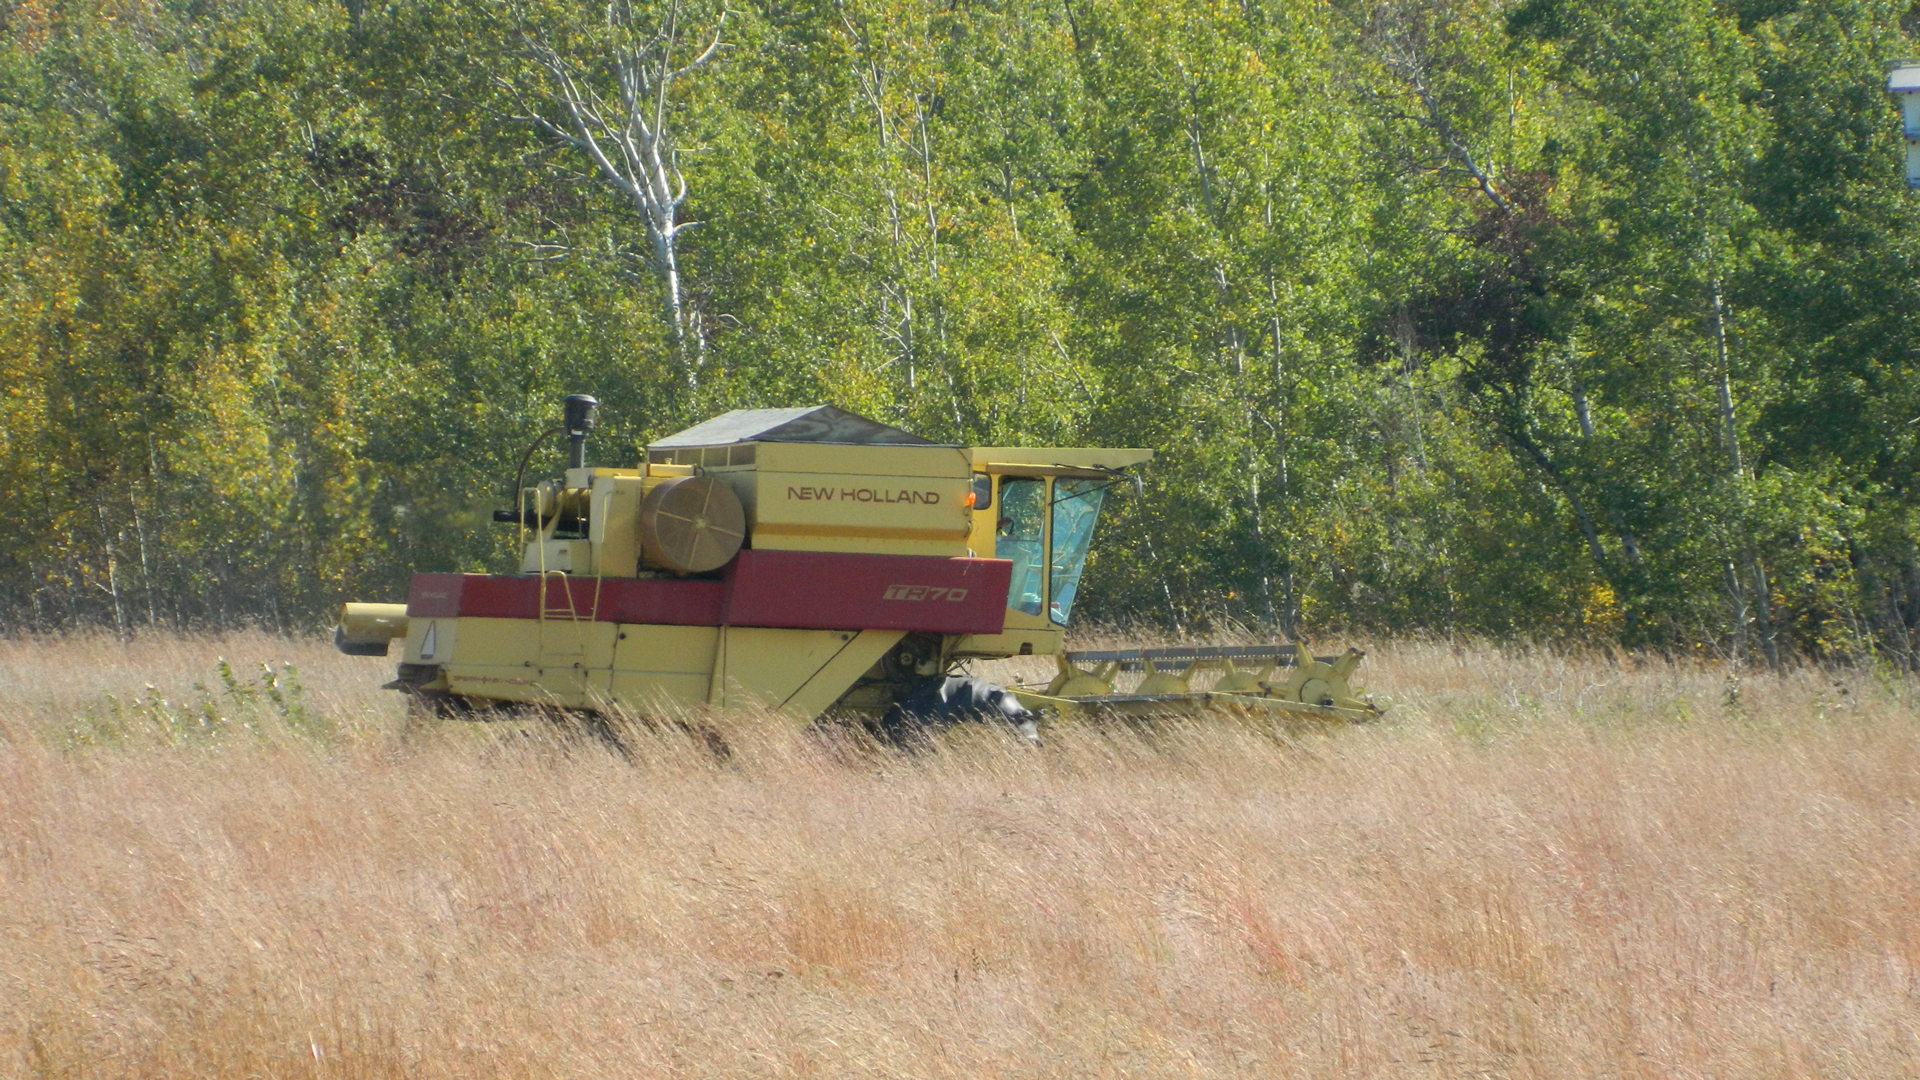 A combine harvesting prairie seed for planting. Grasses and some late blooming flowers are effectively harvested this way, but are often missing the full diversity of plants needed in a seed mix. Photo © Jonathan Eerkes